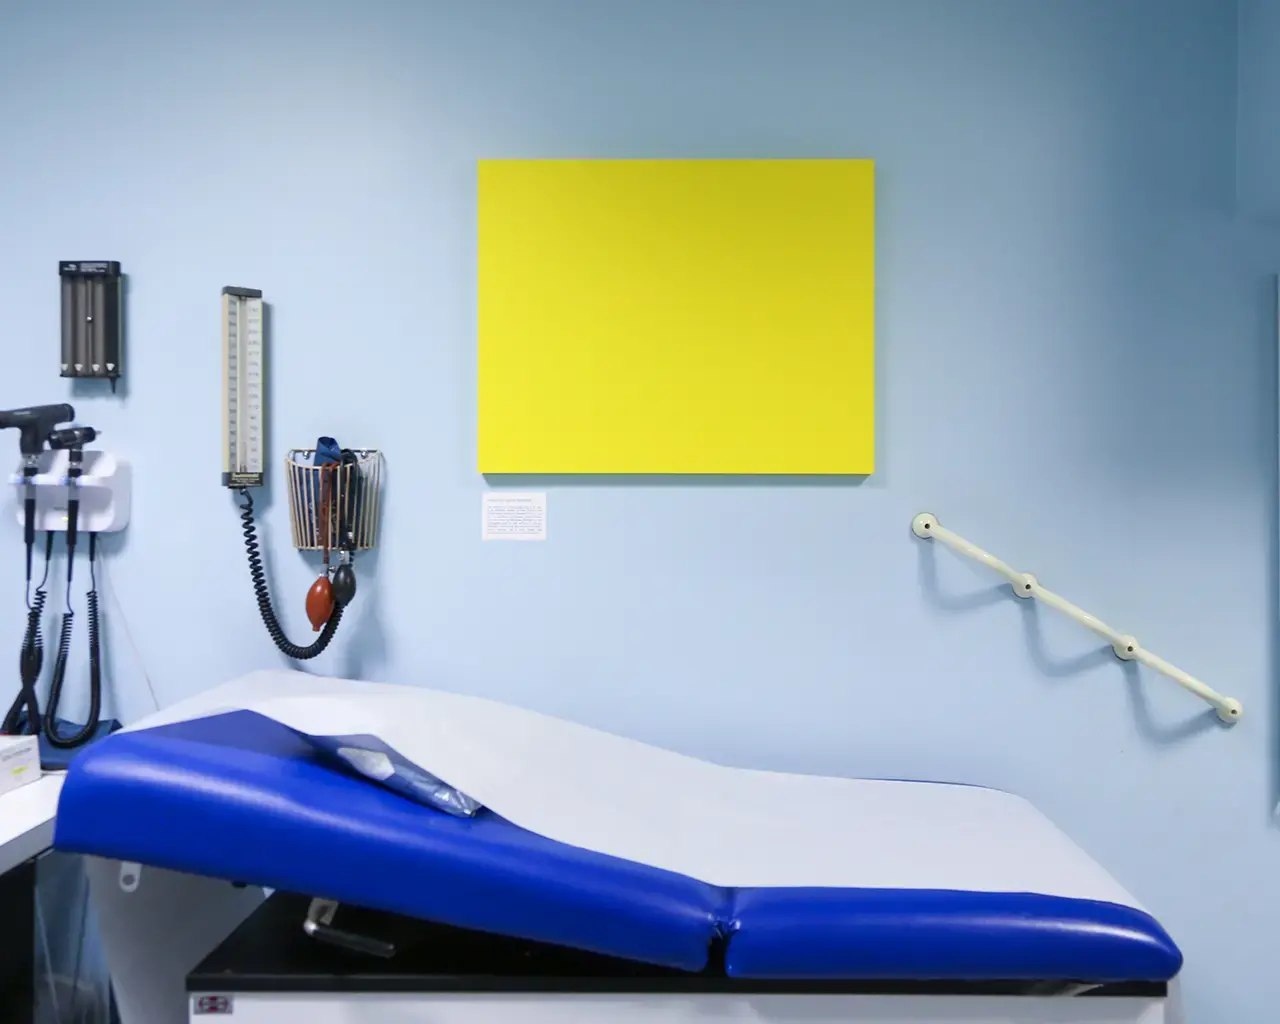 Pew Fellow Maia Chao, A Picture of Health,&nbsp;2022, installed in a doctor's office, Philadelphia, PA. Photo courtesy of the artist.